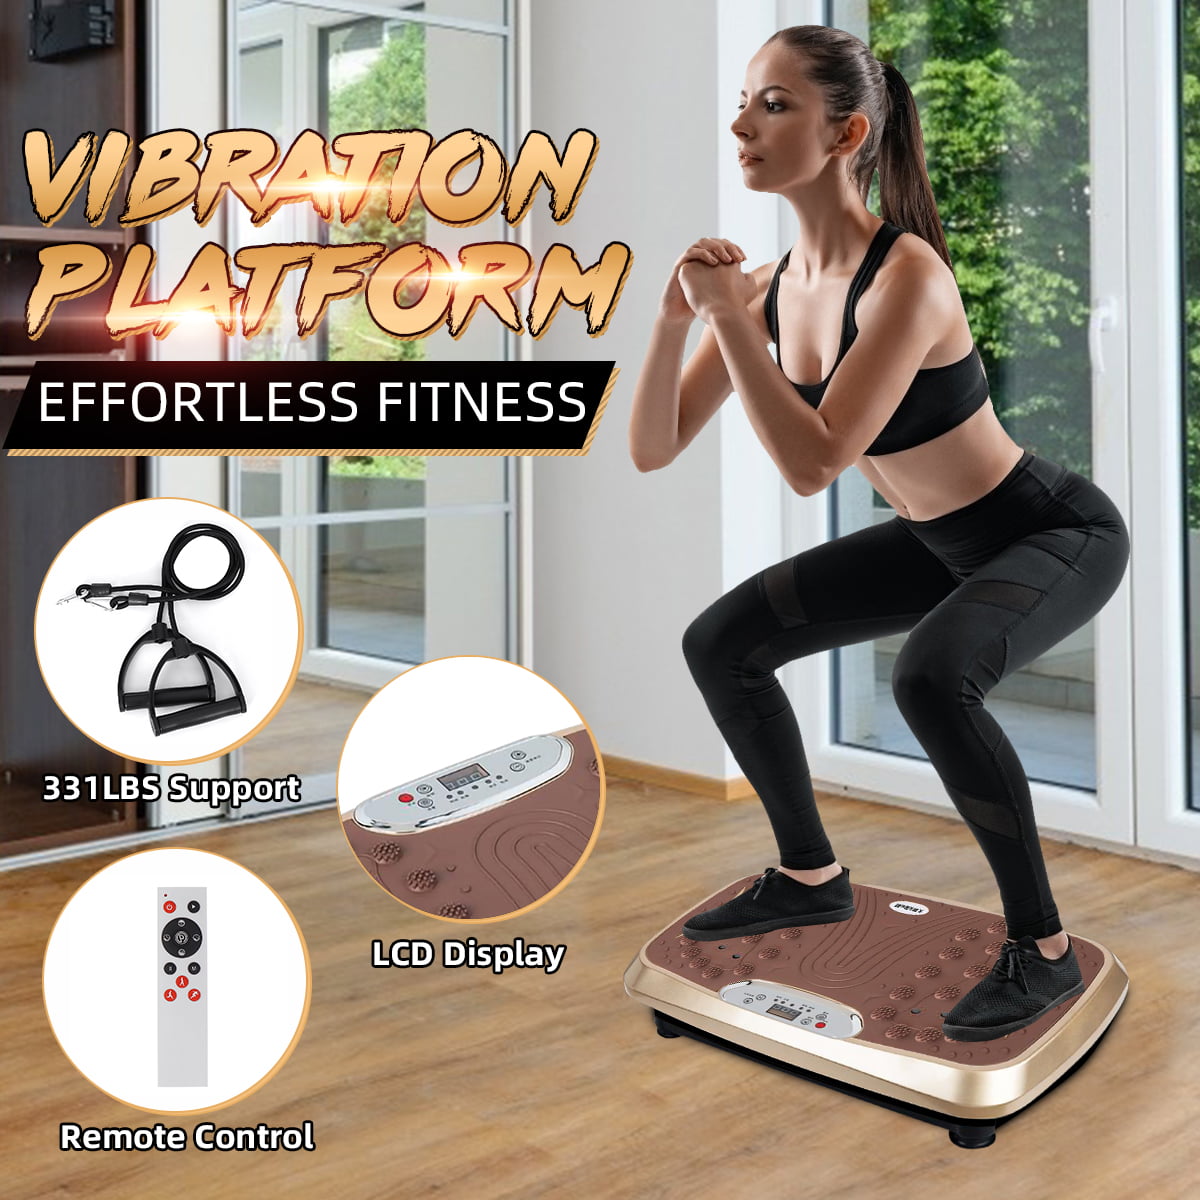 Vibration Plate Exercise Whole Body Fitness Platform Machine Power Fit Workout 